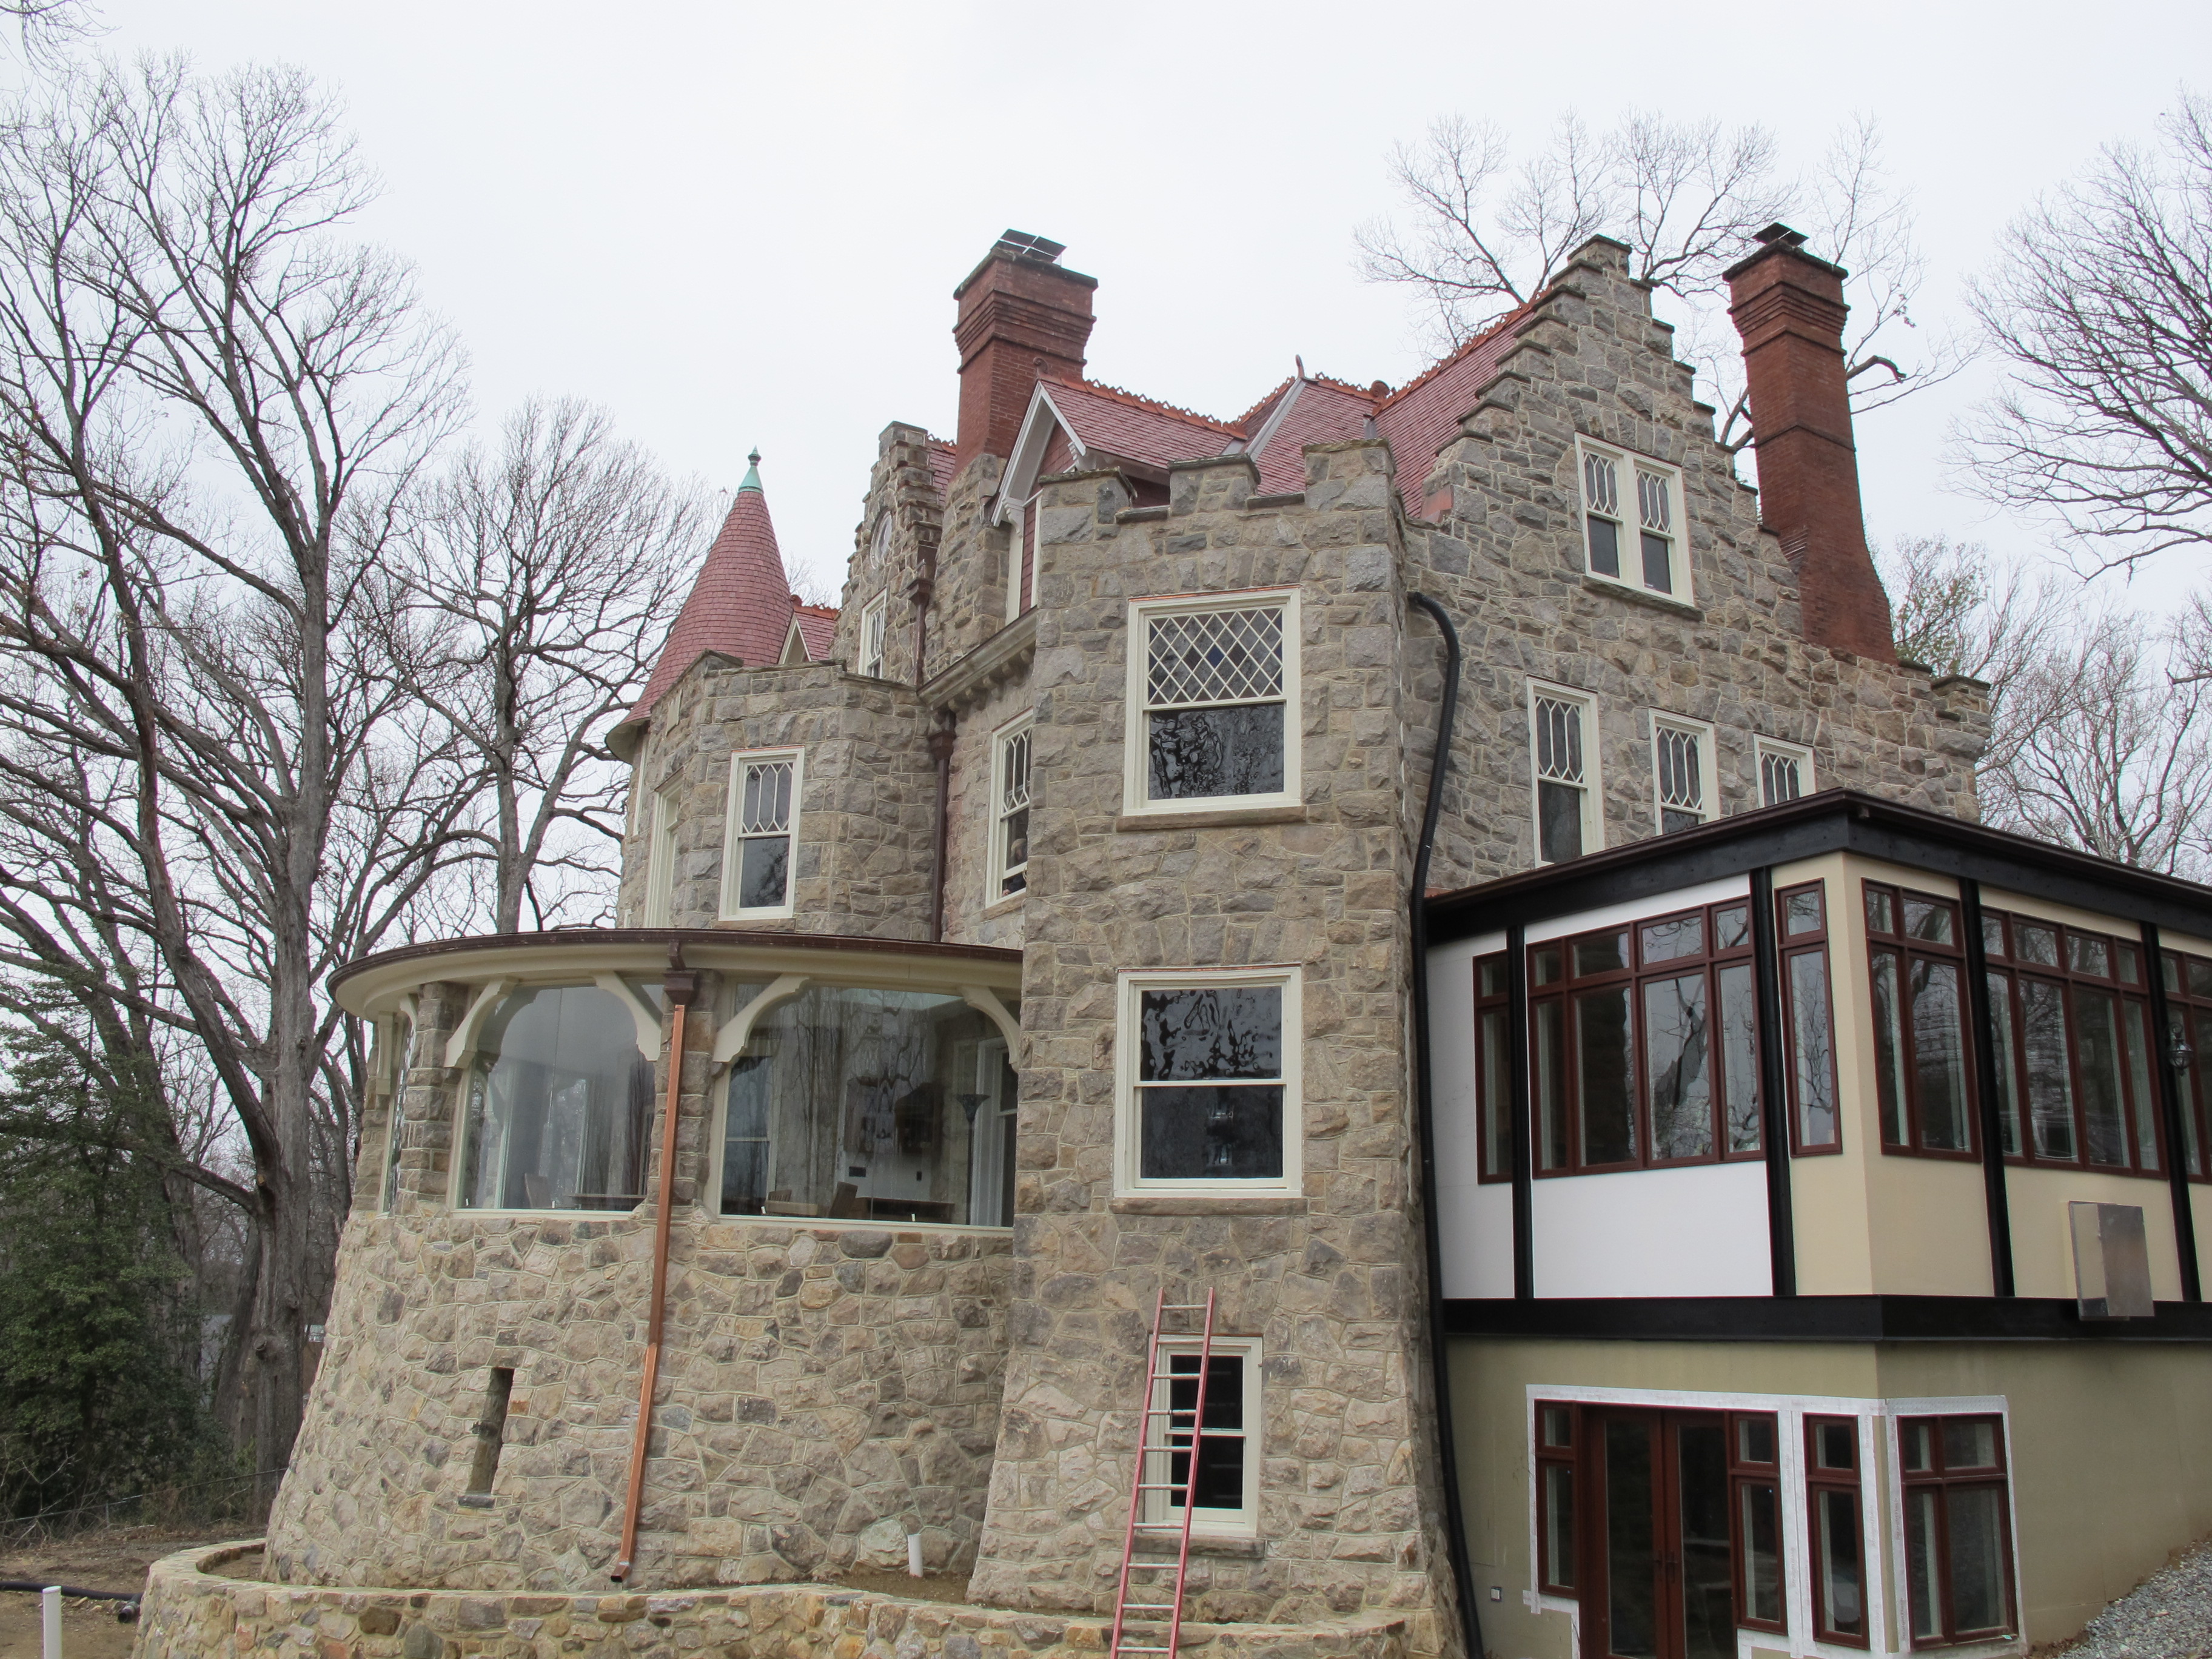 Long deteriorated, Baltzley Castle, a Montgomery County historic site, has been rehabbed.